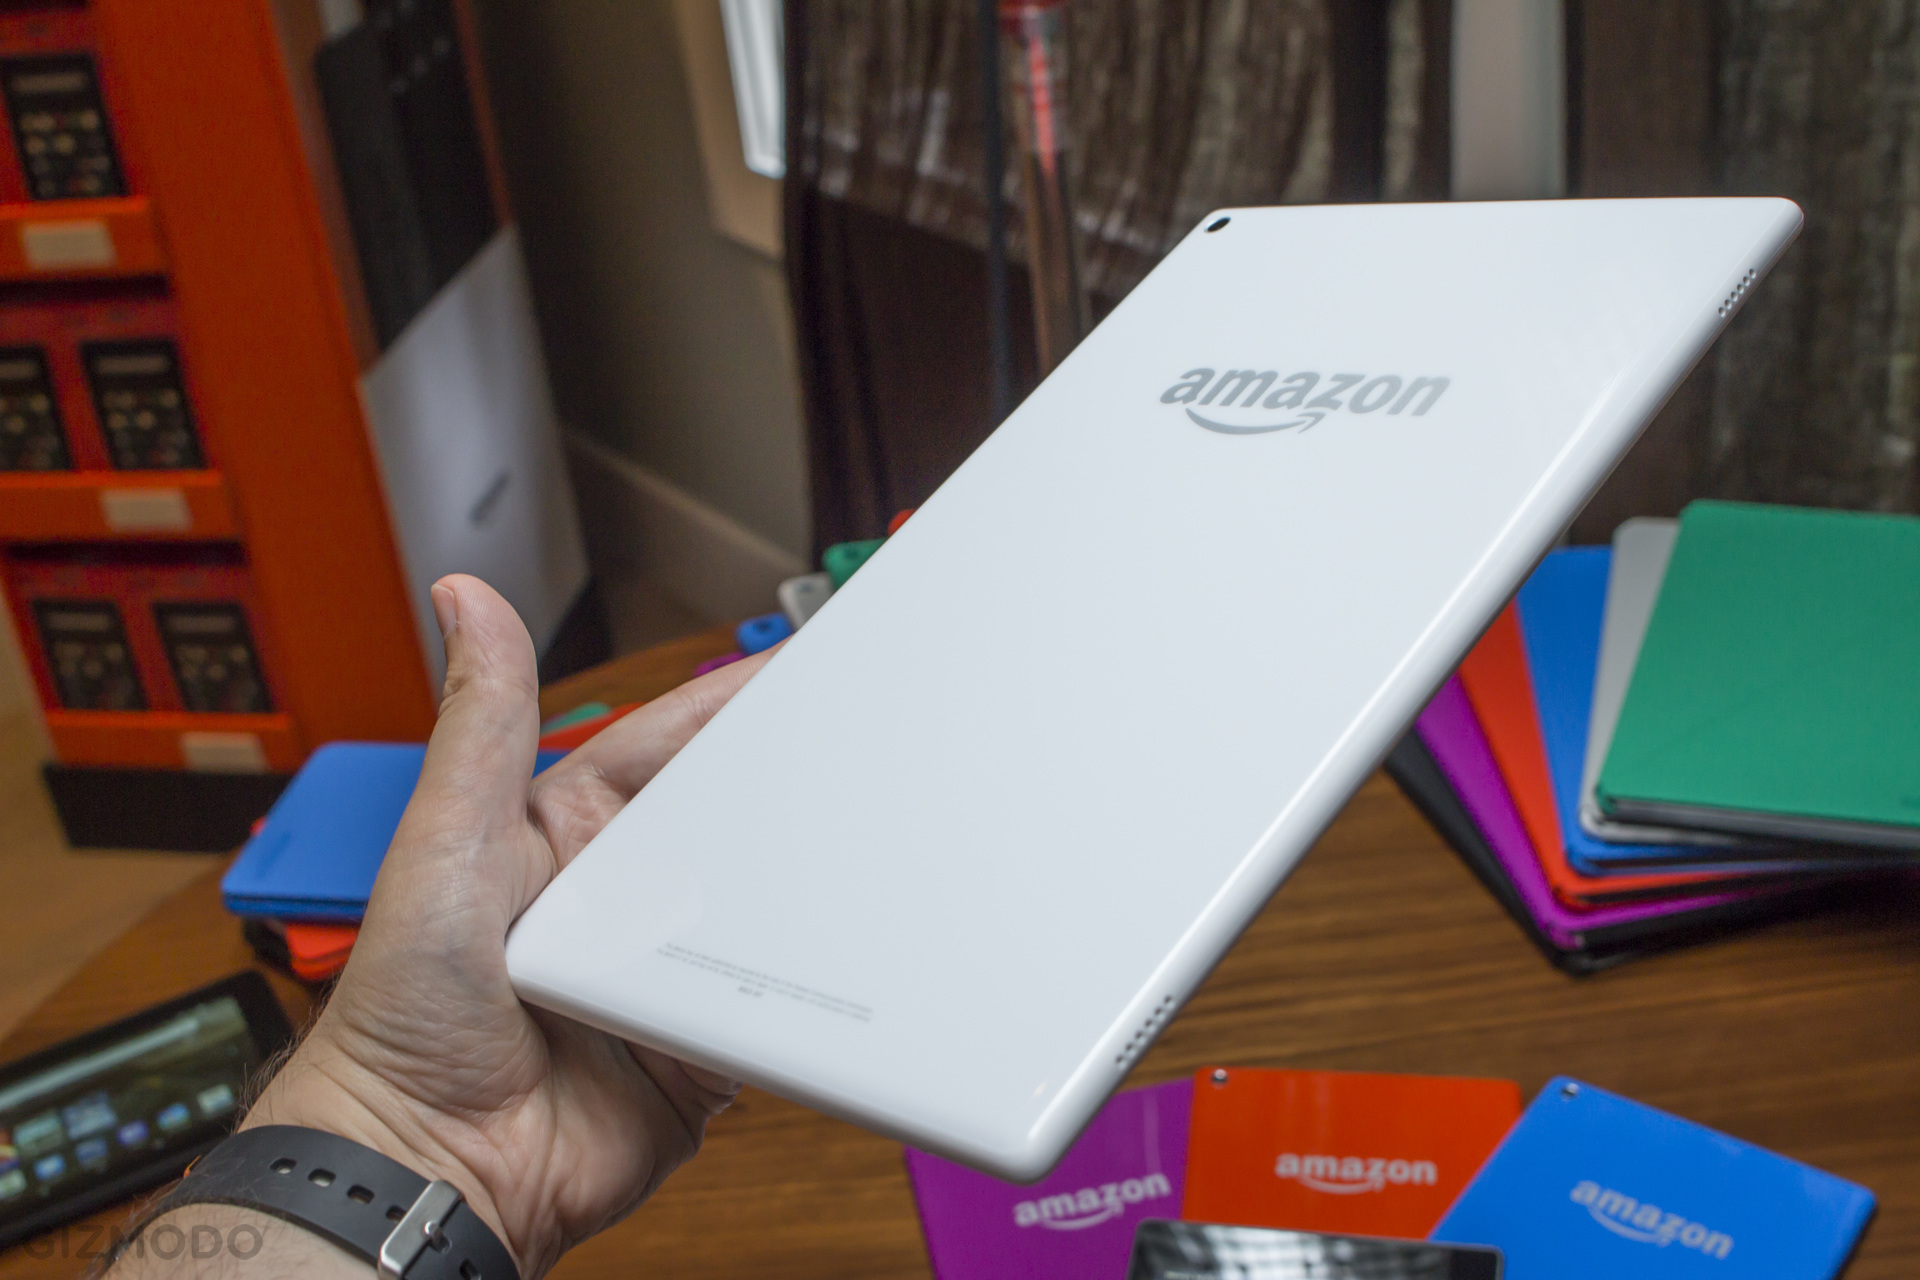 Amazon’s $50 Fire Tablet Is The Impulse Buy That Never Ends